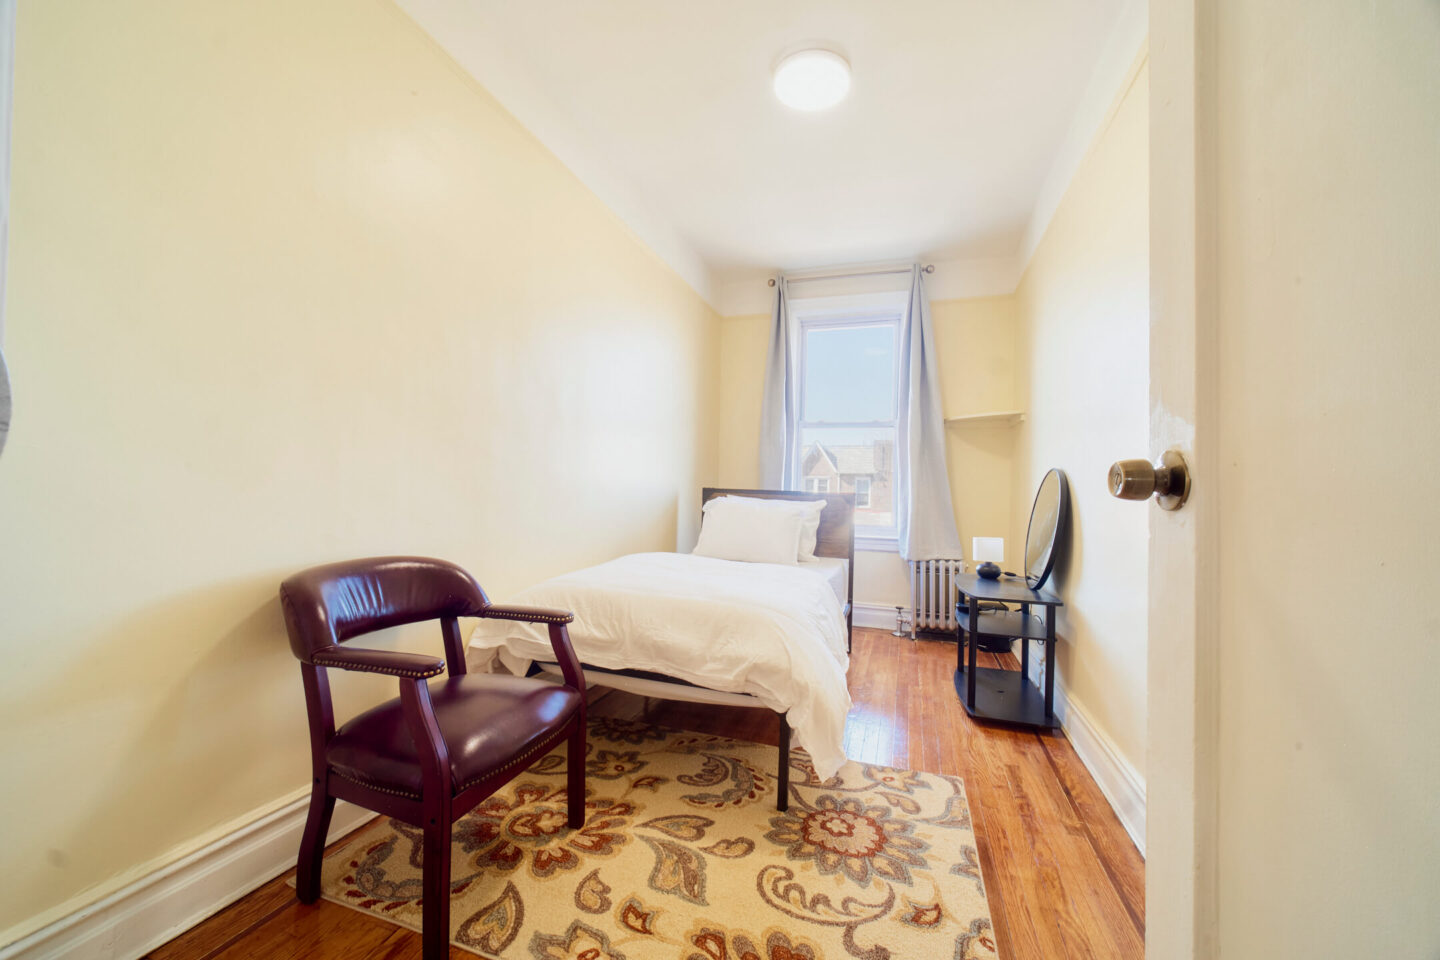 33-19 69th Street Woodside, New York - Real Estate Photography - AirBnb Listing